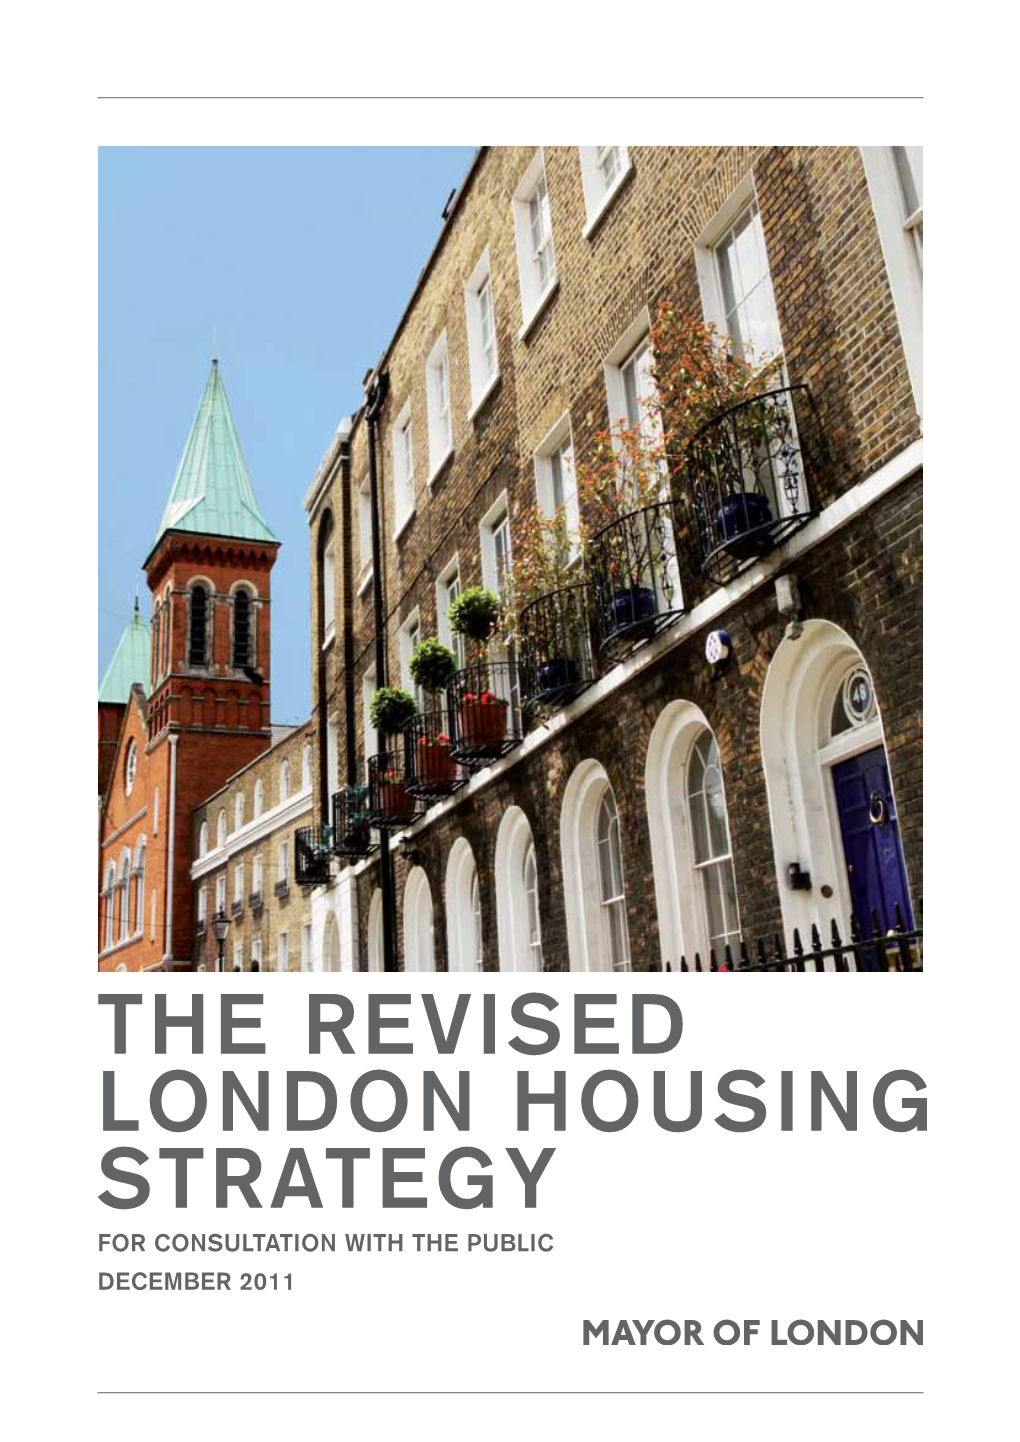 The Revised London Housing Strategy for Consultation with the Public December 2011 the Revised London Housing Strategy